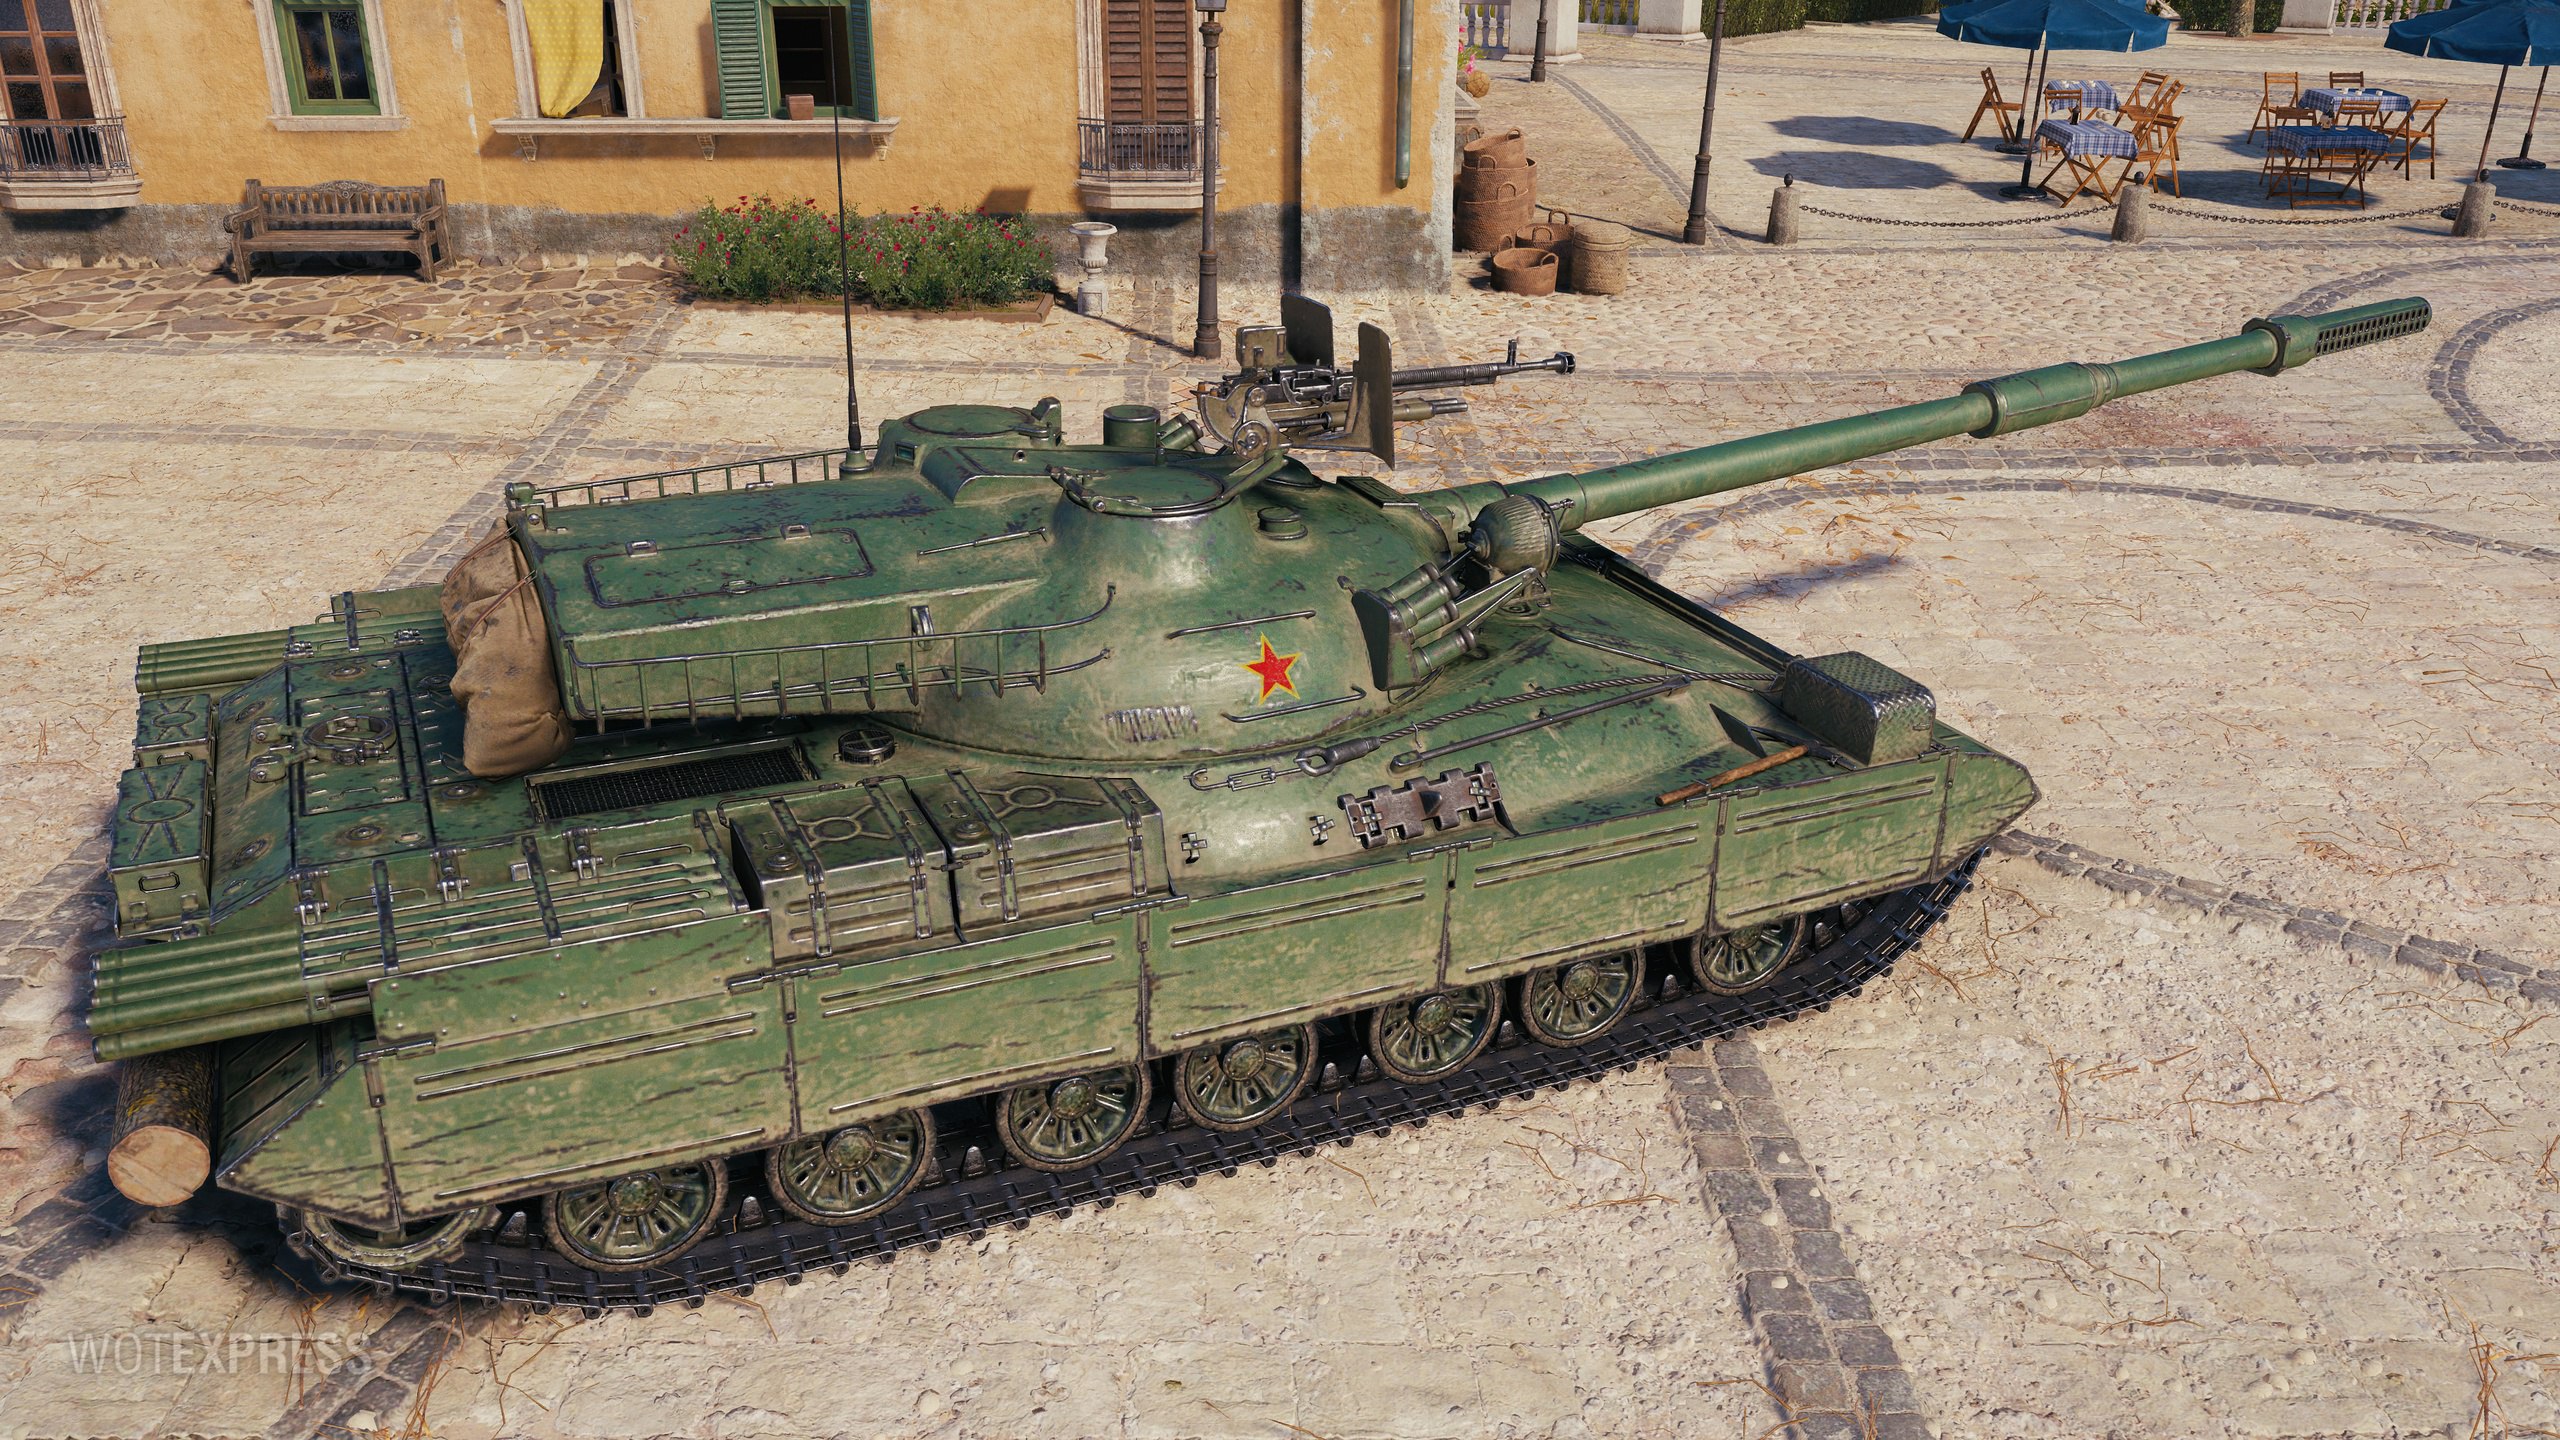 Chinese heavy spam is the new Russian heavy spam - BZ-72-1, a tier